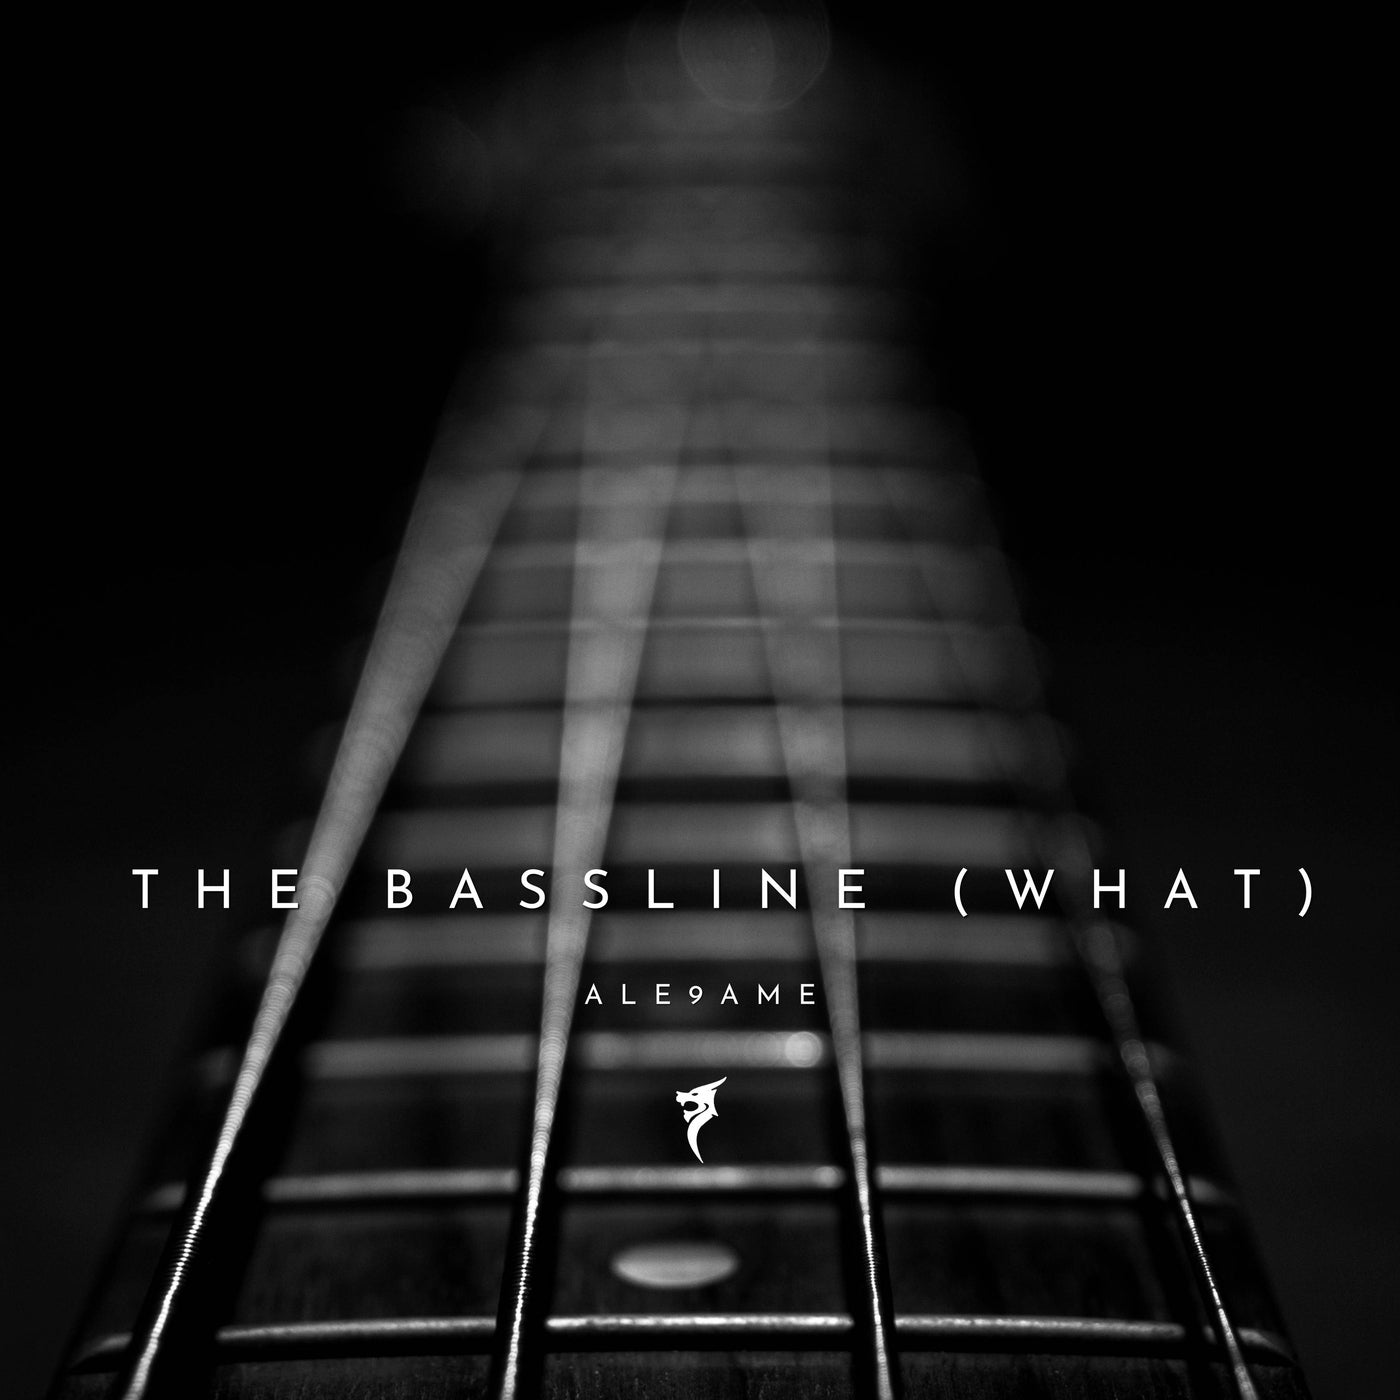 The Bassline (What)